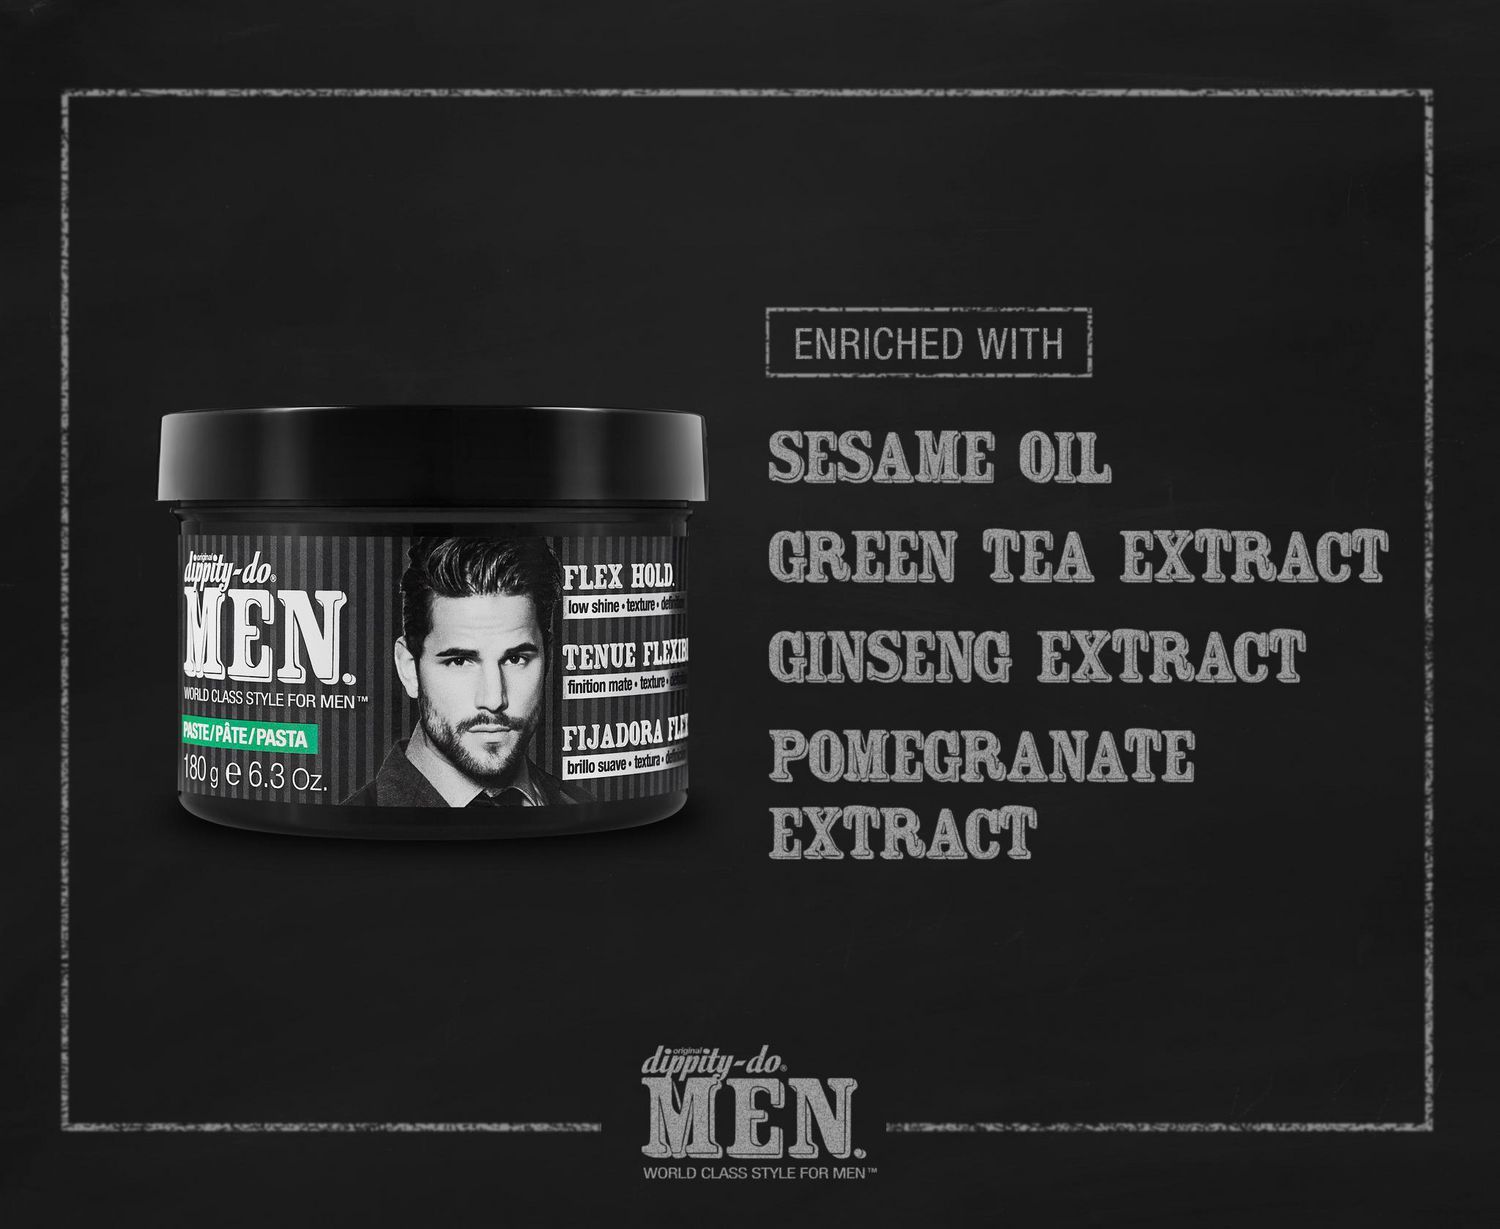 dippity-do MEN Texture Paste Flexibility and staying power for